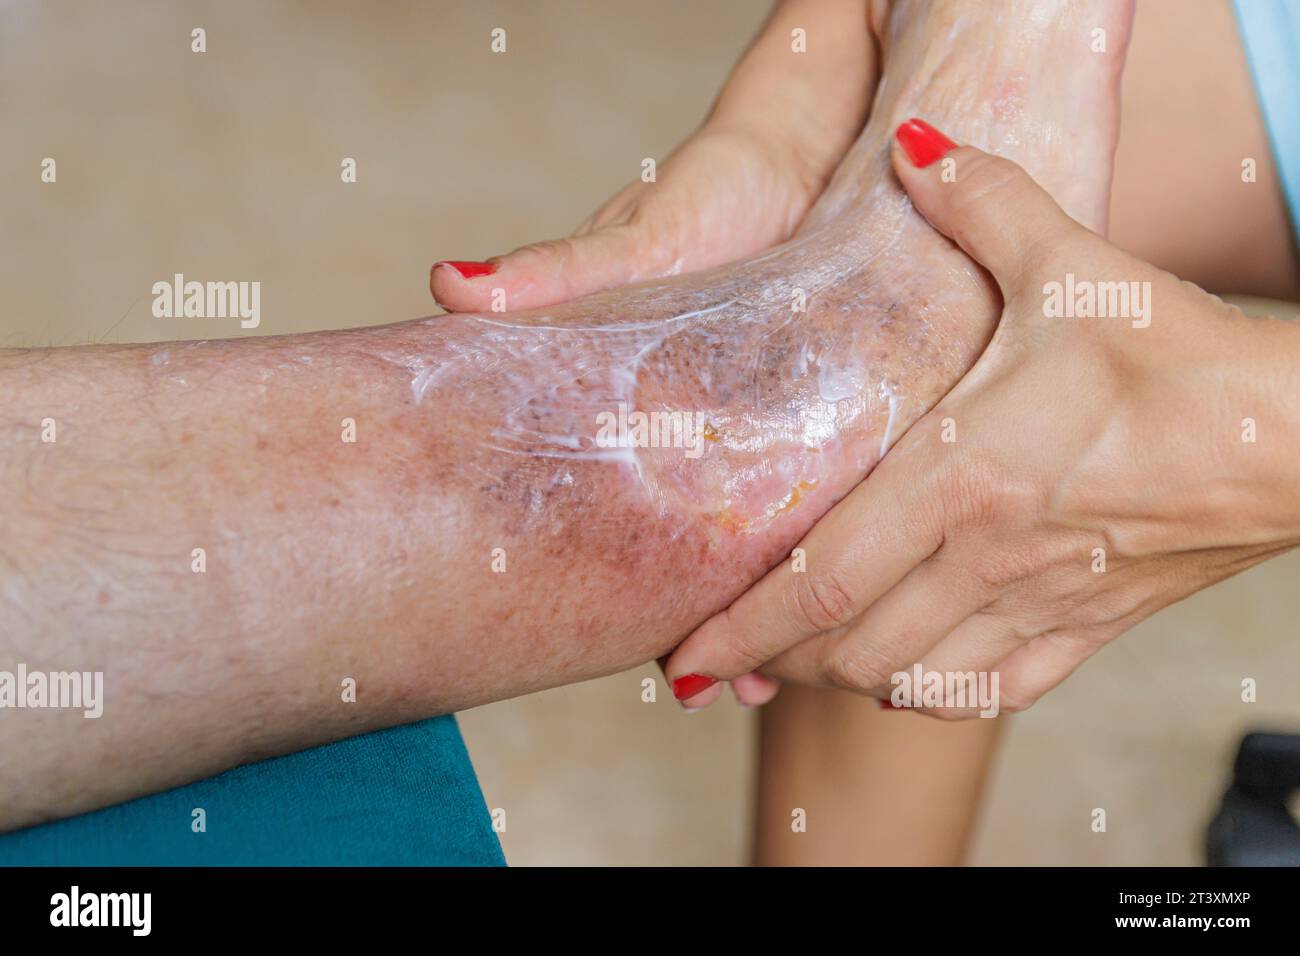 Home health care for an elderly person. Leg with ulcer due to diabetes. Stock Photo